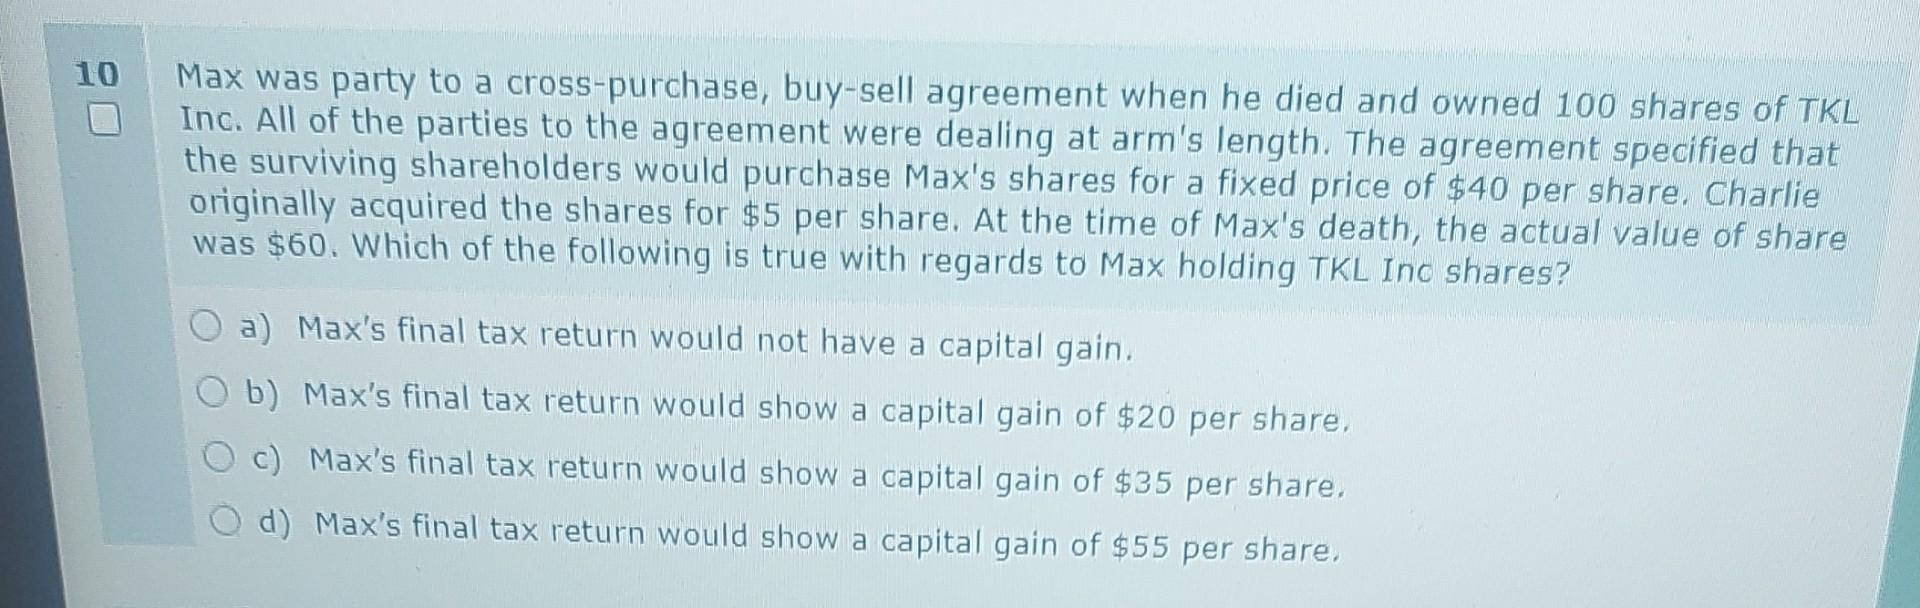 solved-max-was-party-to-a-cross-purchase-buy-sell-agreement-chegg